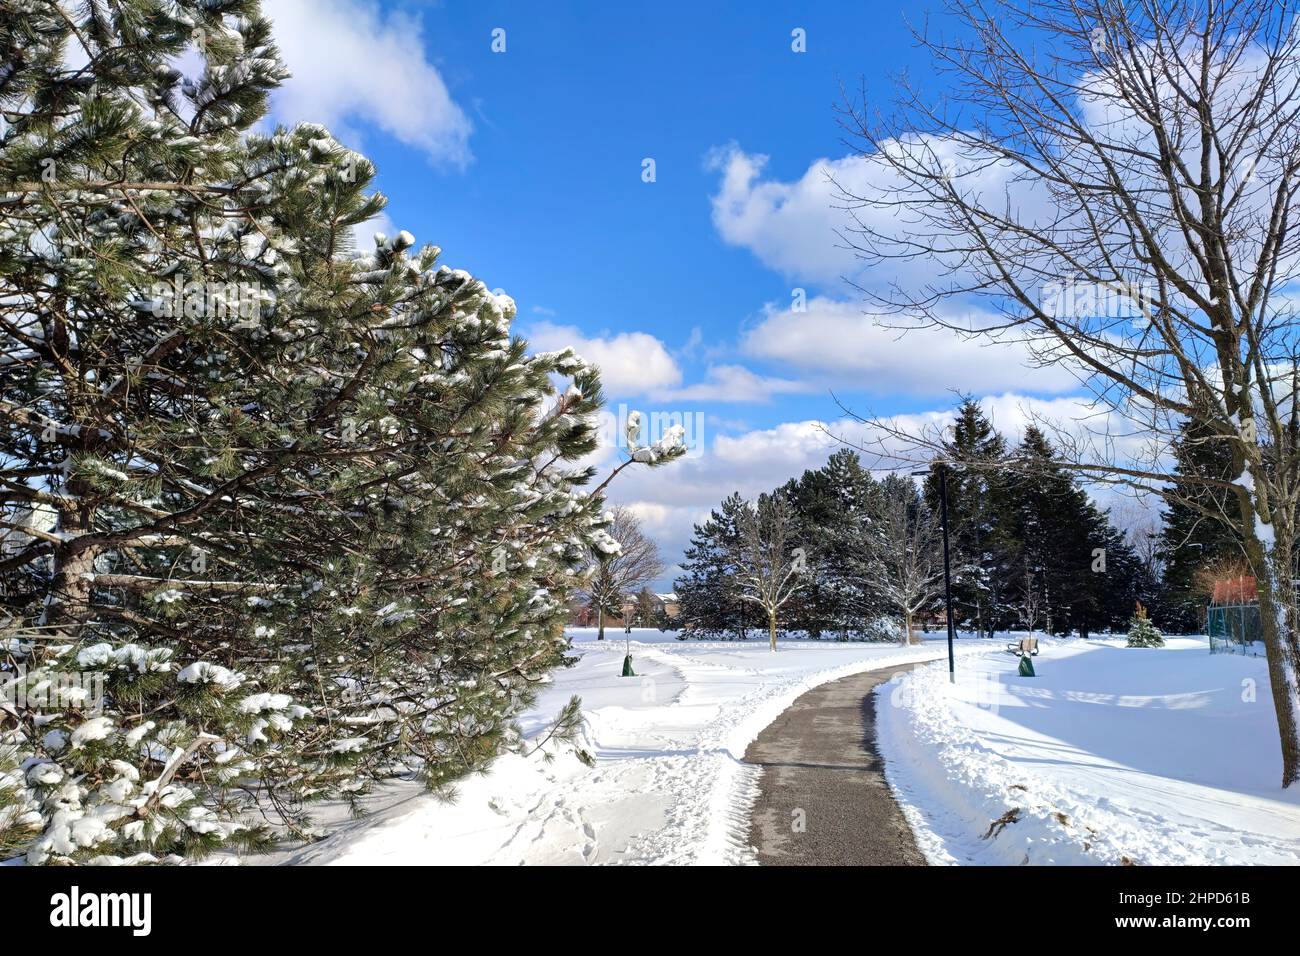 Winter snow creates picturesque scenery on the footpath in the park with deep snow. Stock Photo